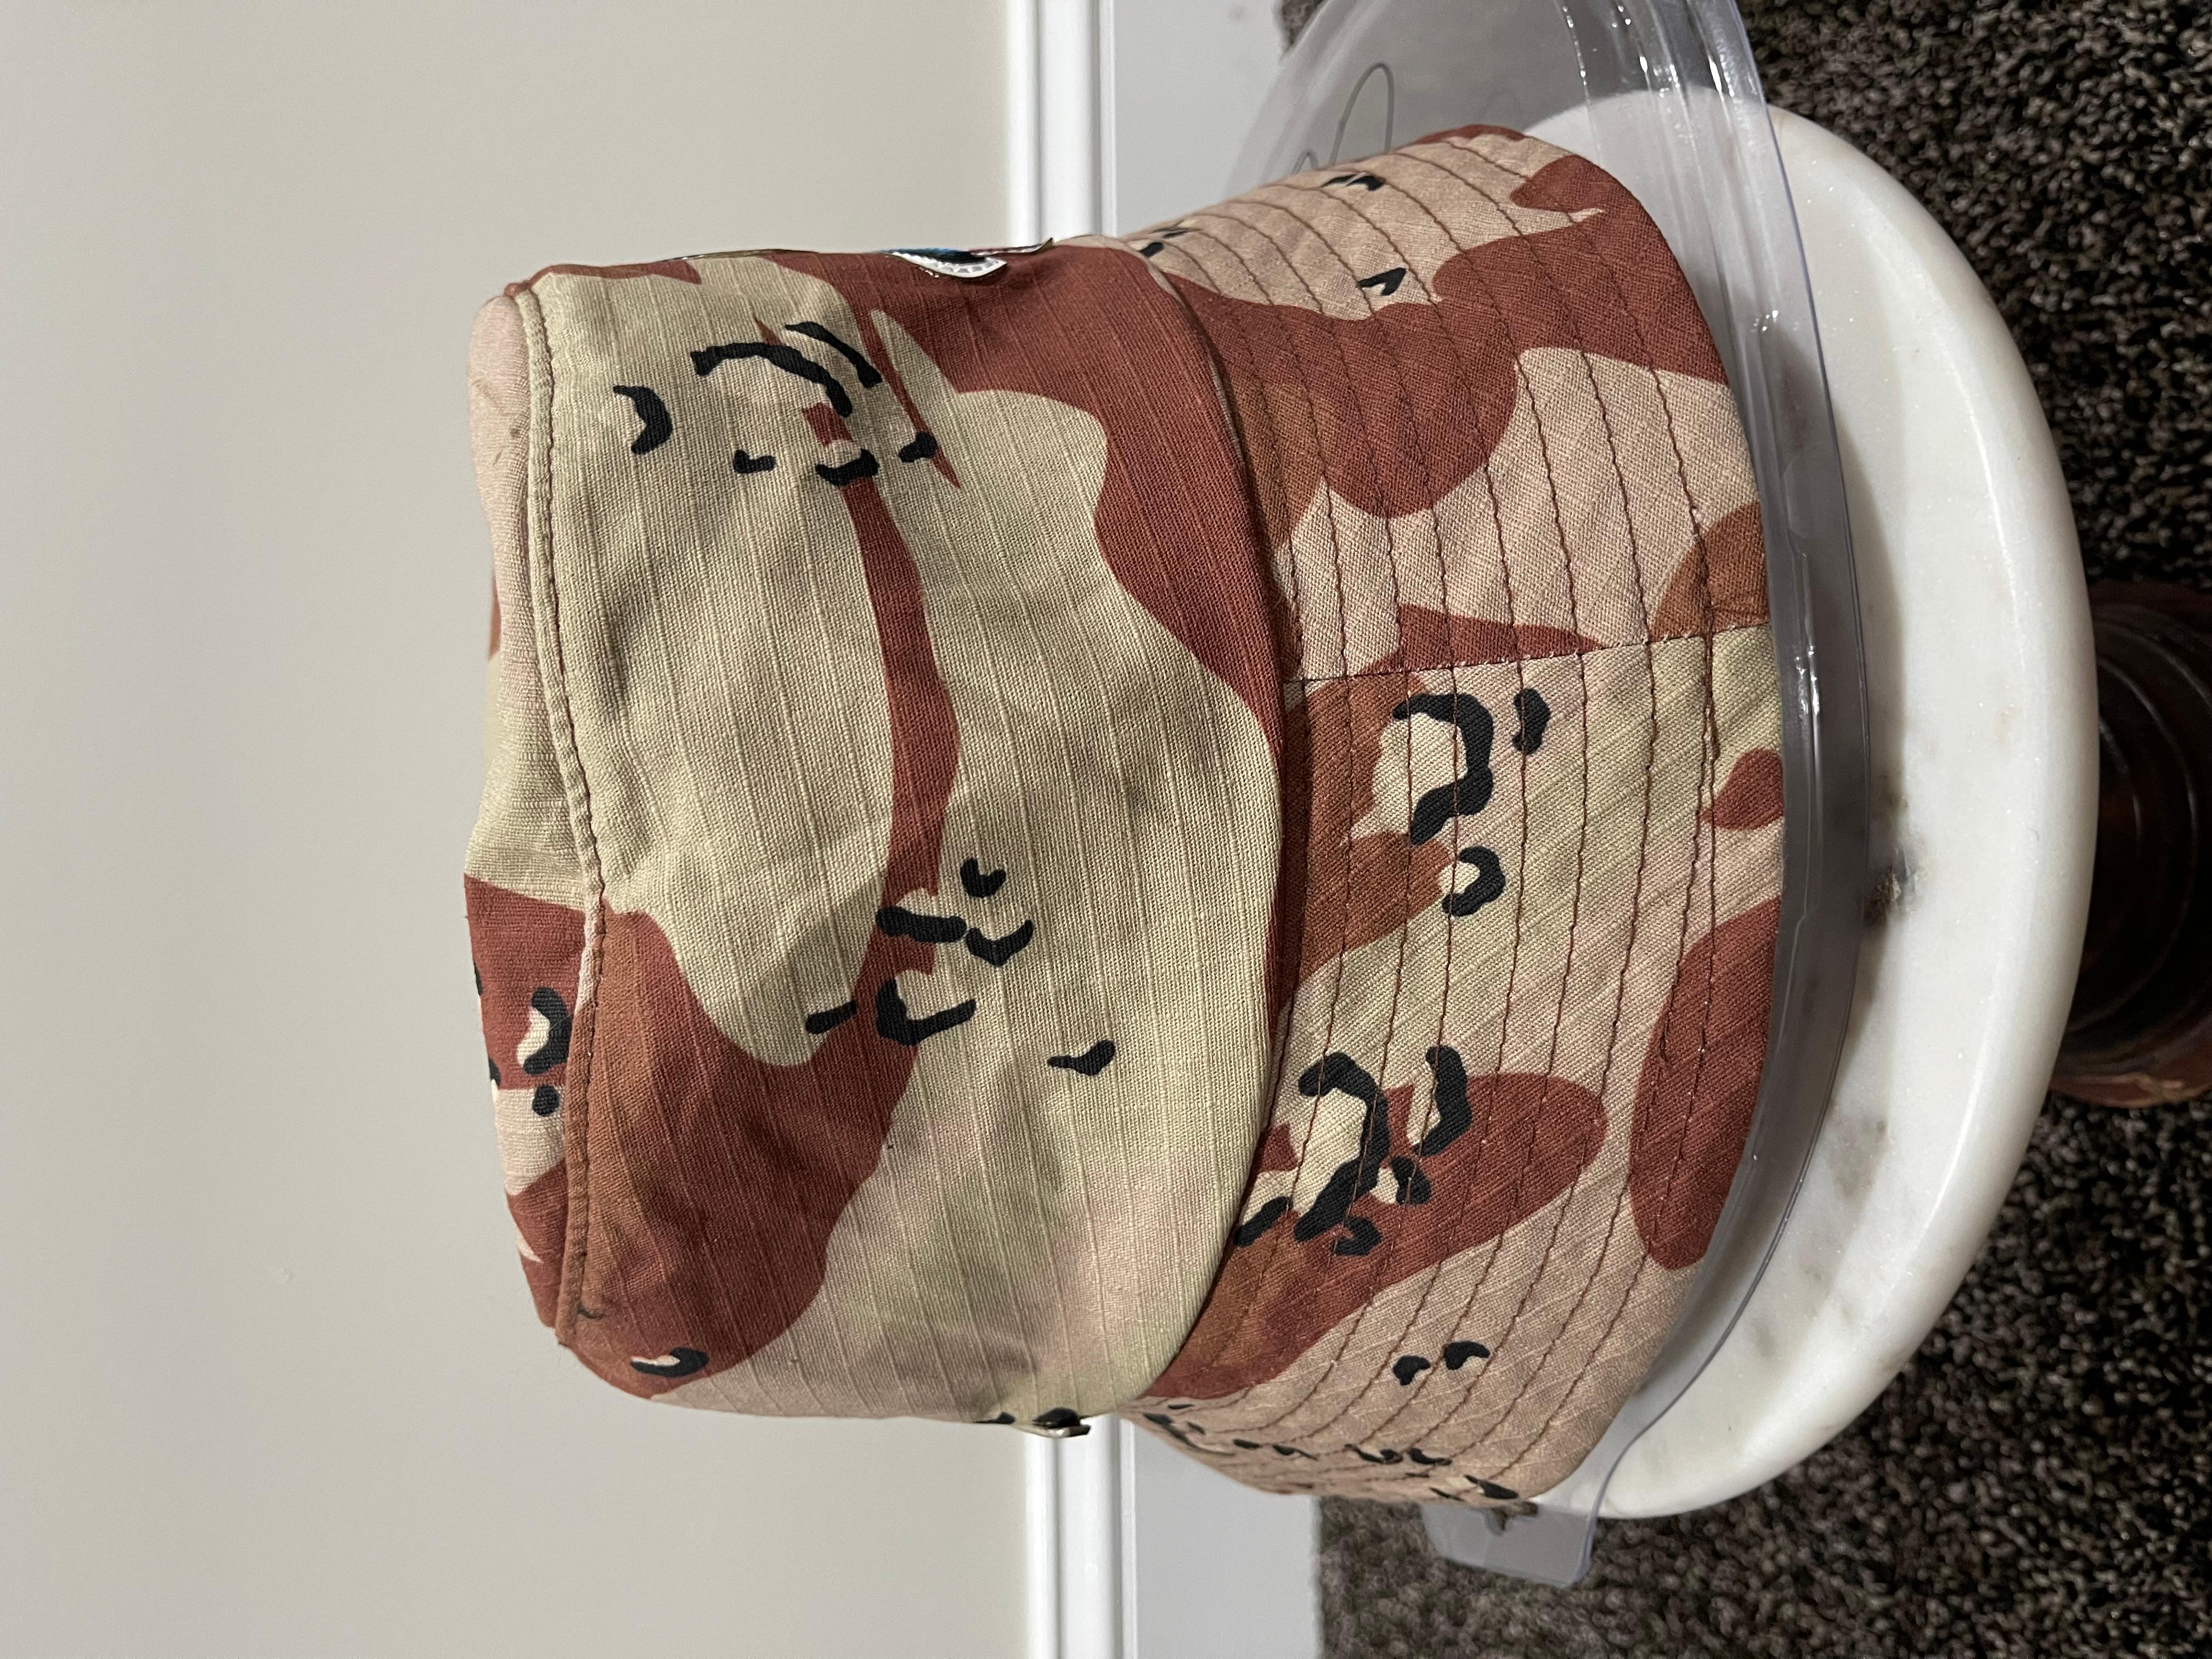 Chrome Hearts Matty Boy Sex Records Desert Camo Bucket Hat

Size Medium
Brand new
Very rare piece

note: has minor mark on top of the hat; must of happened during transit. Can not even tell its there, blends in with the camo. See pics

All sales are